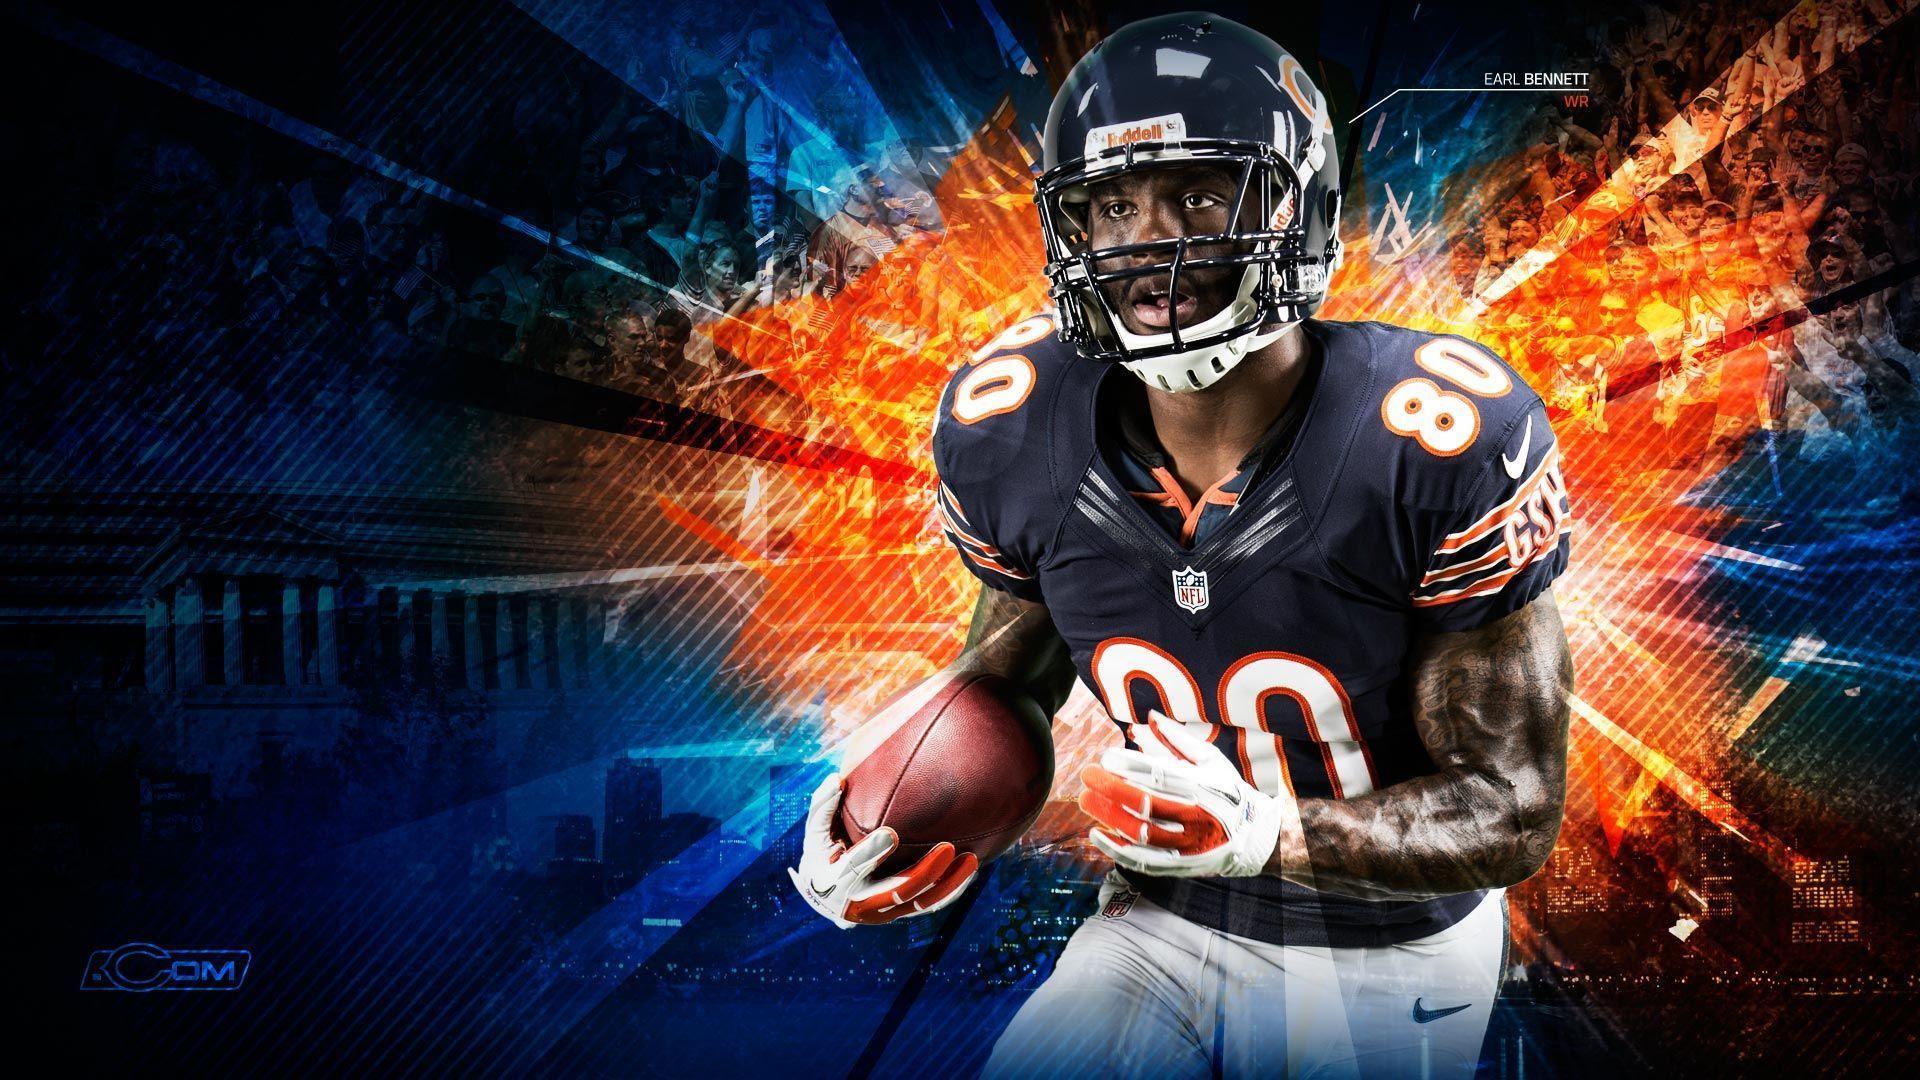 Chicago Bears Wallpapers HD